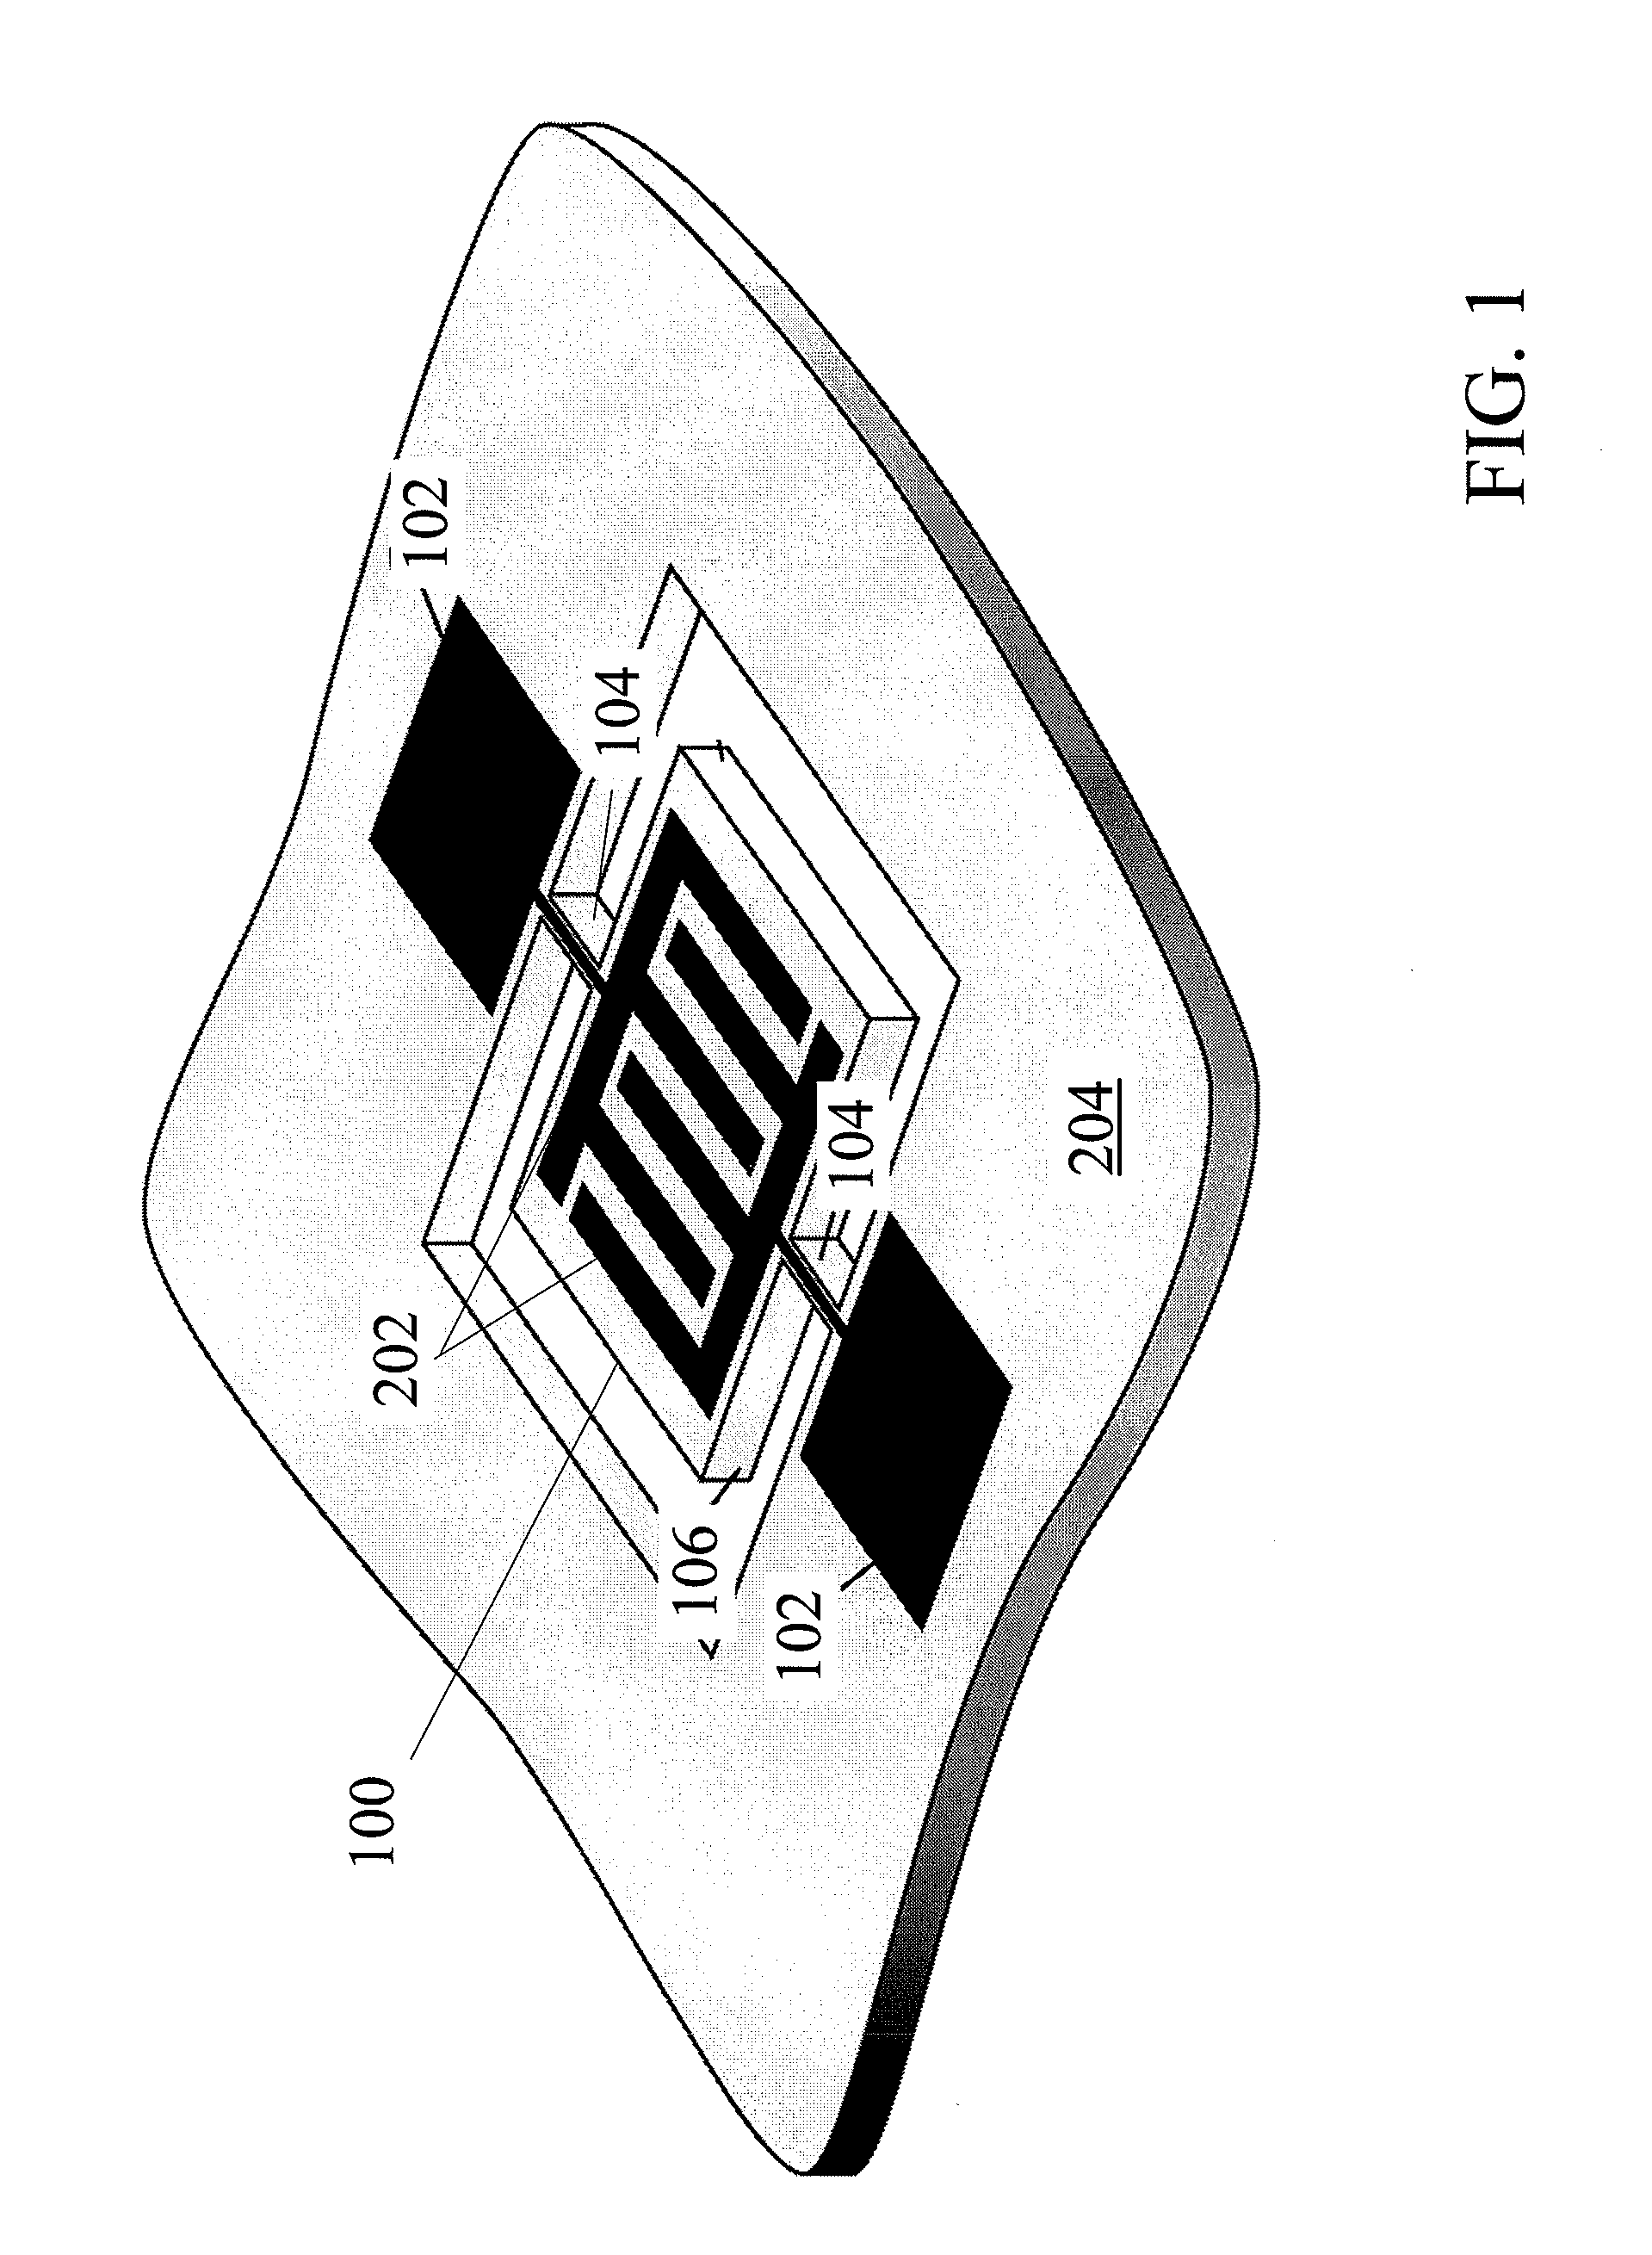 Mechanical resonating structures including a temperature compensation structure